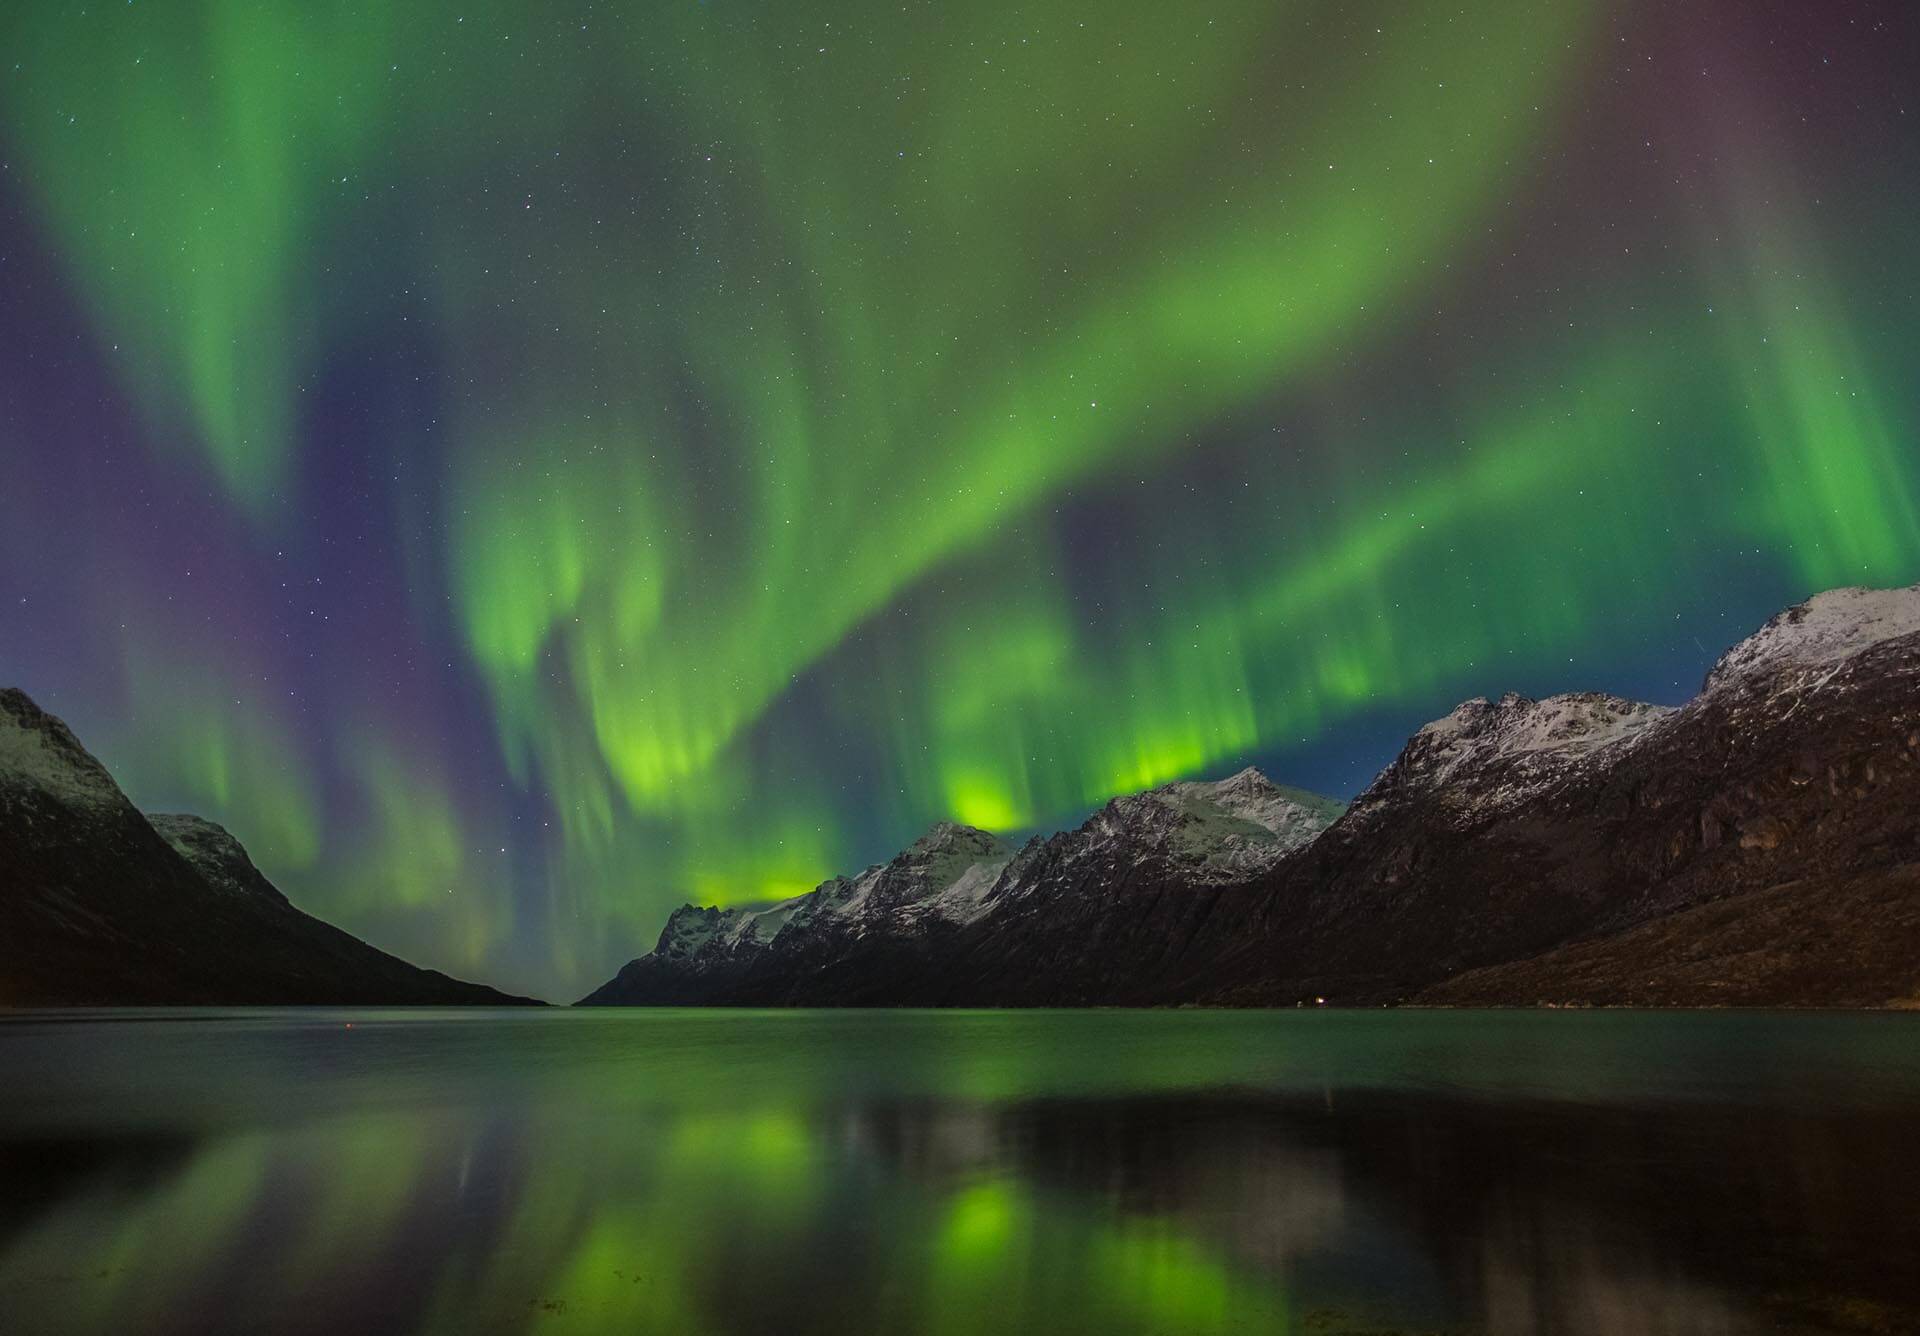 Book a trip during the right season to give yourself the best odds of capturing the northern lights